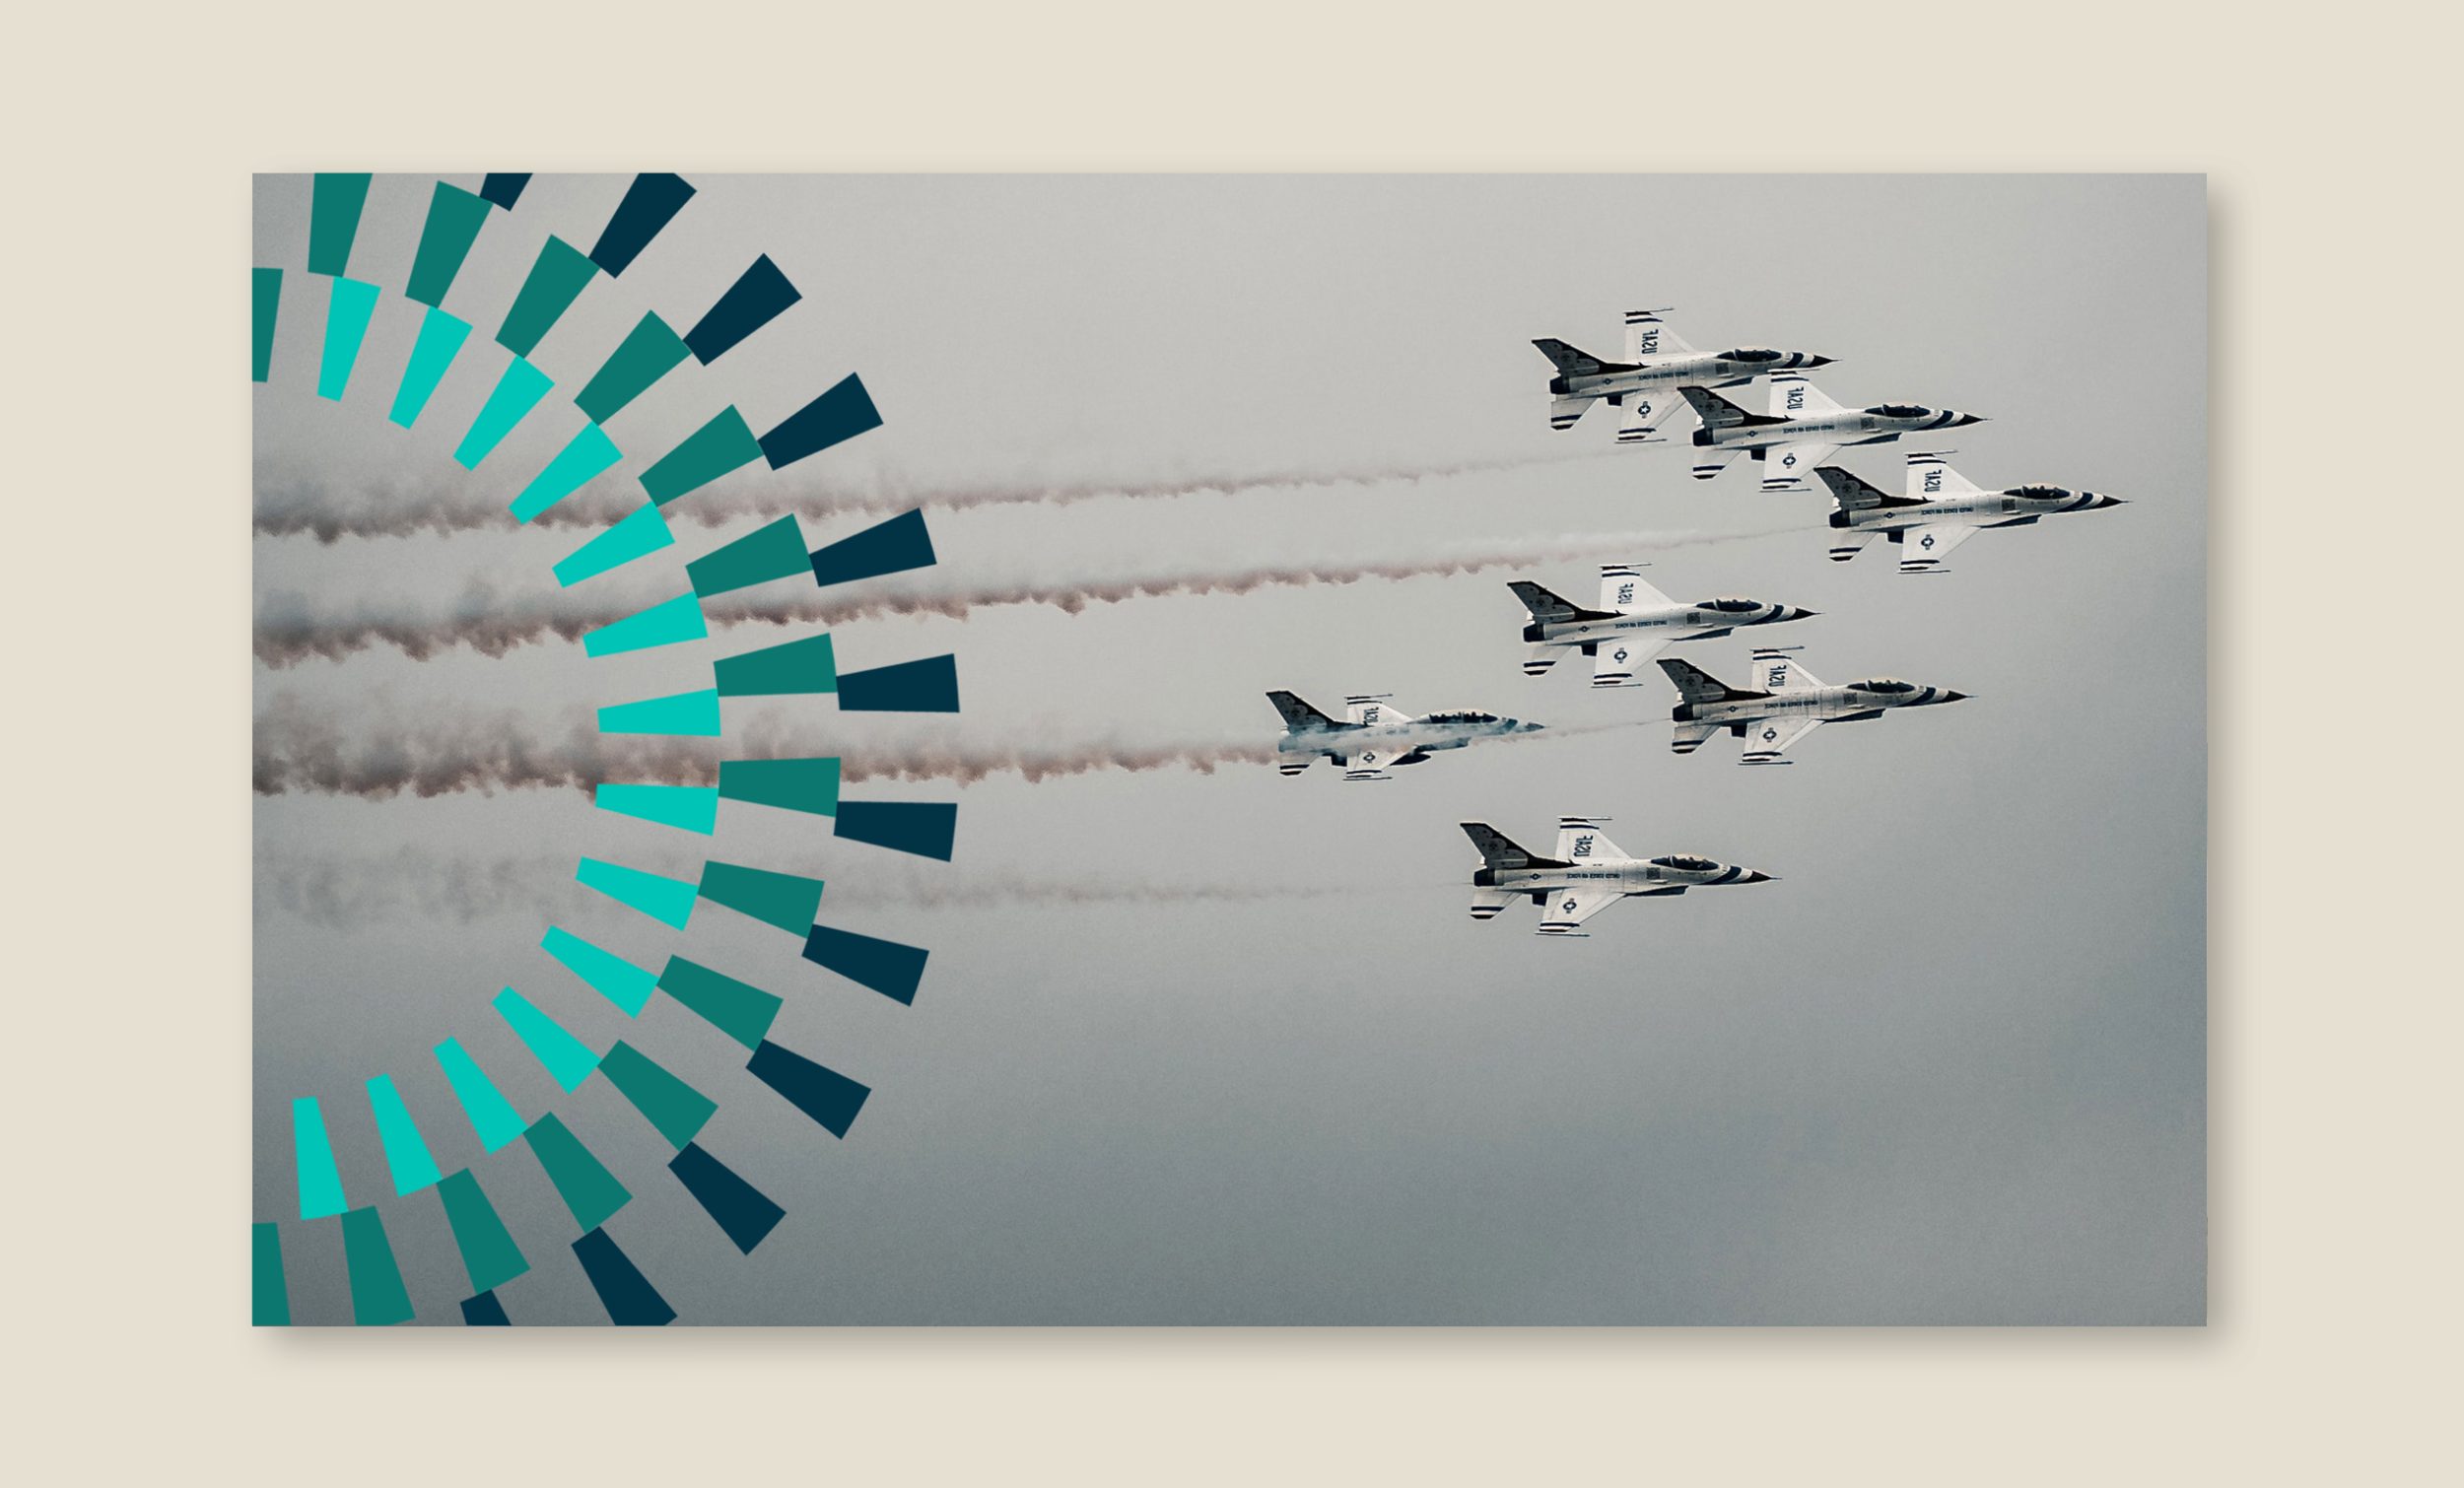 idea for an ad layout or a presentation cover with multi-color turquoise, green and teal mark as motif over a photo of fighter jets